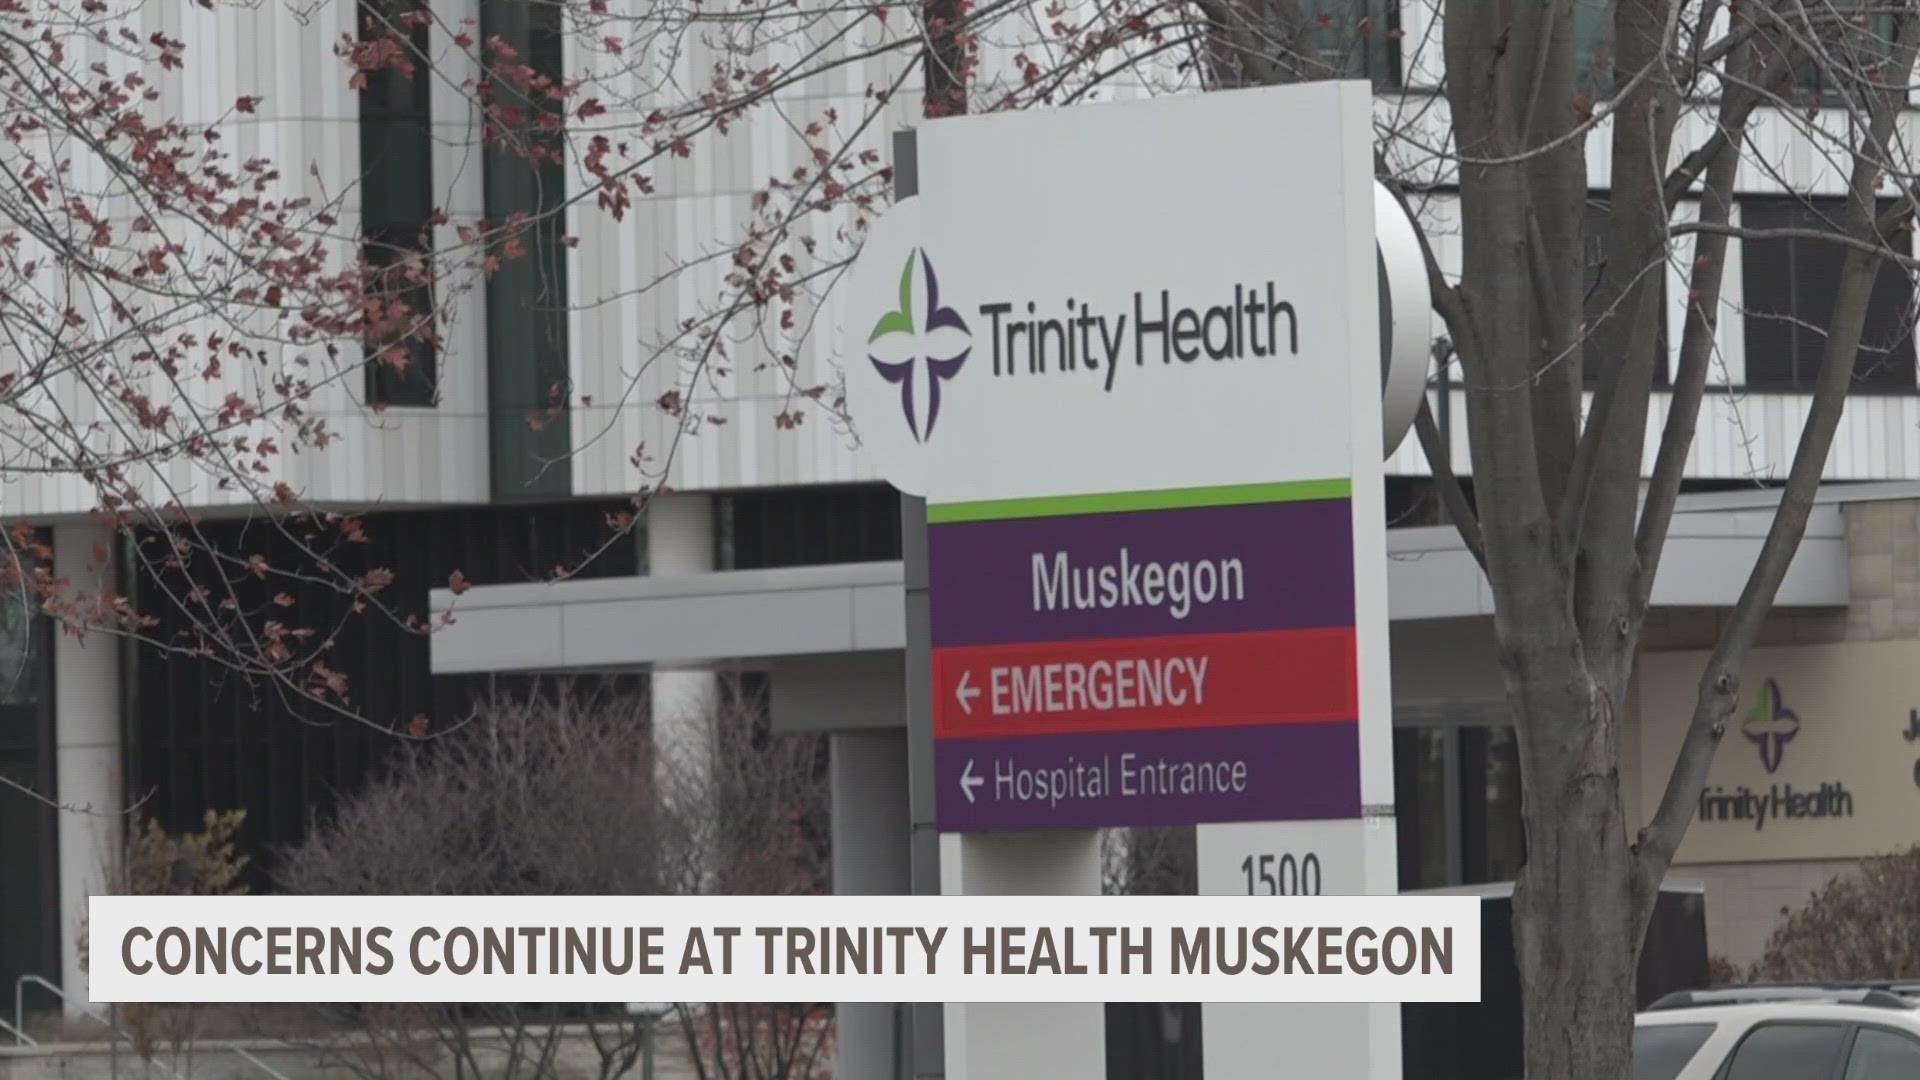 Some patients continue to share concerns about wait times at Trinity Health in Muskegon.